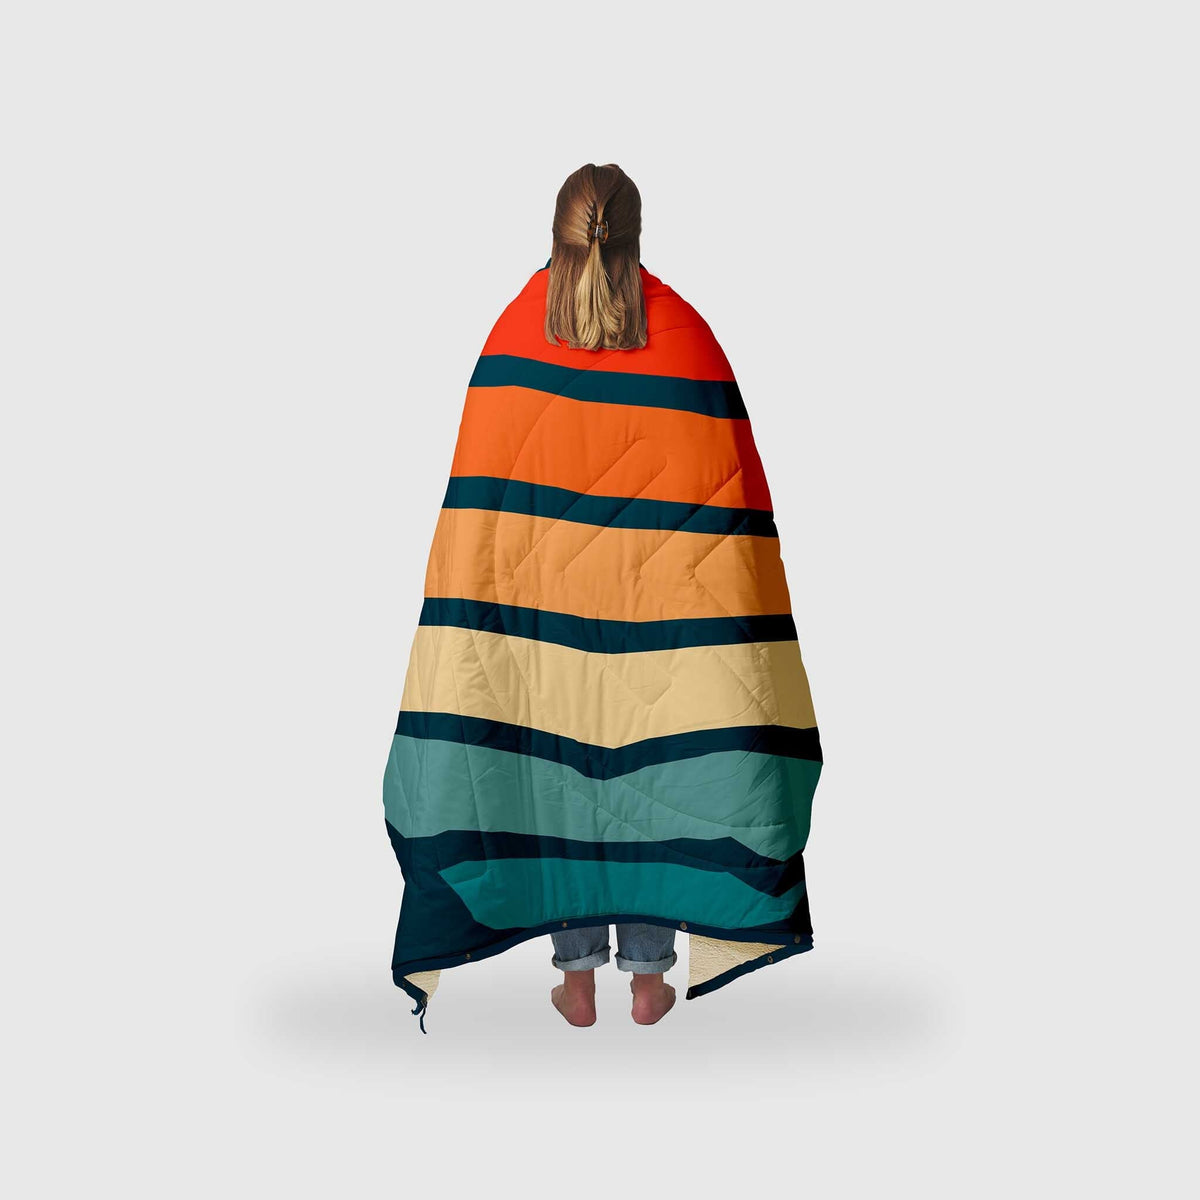 VOITED CloudTouch® Indoor/Outdoor Camping Blanket - Sunset Stripes Blankets VOITED 